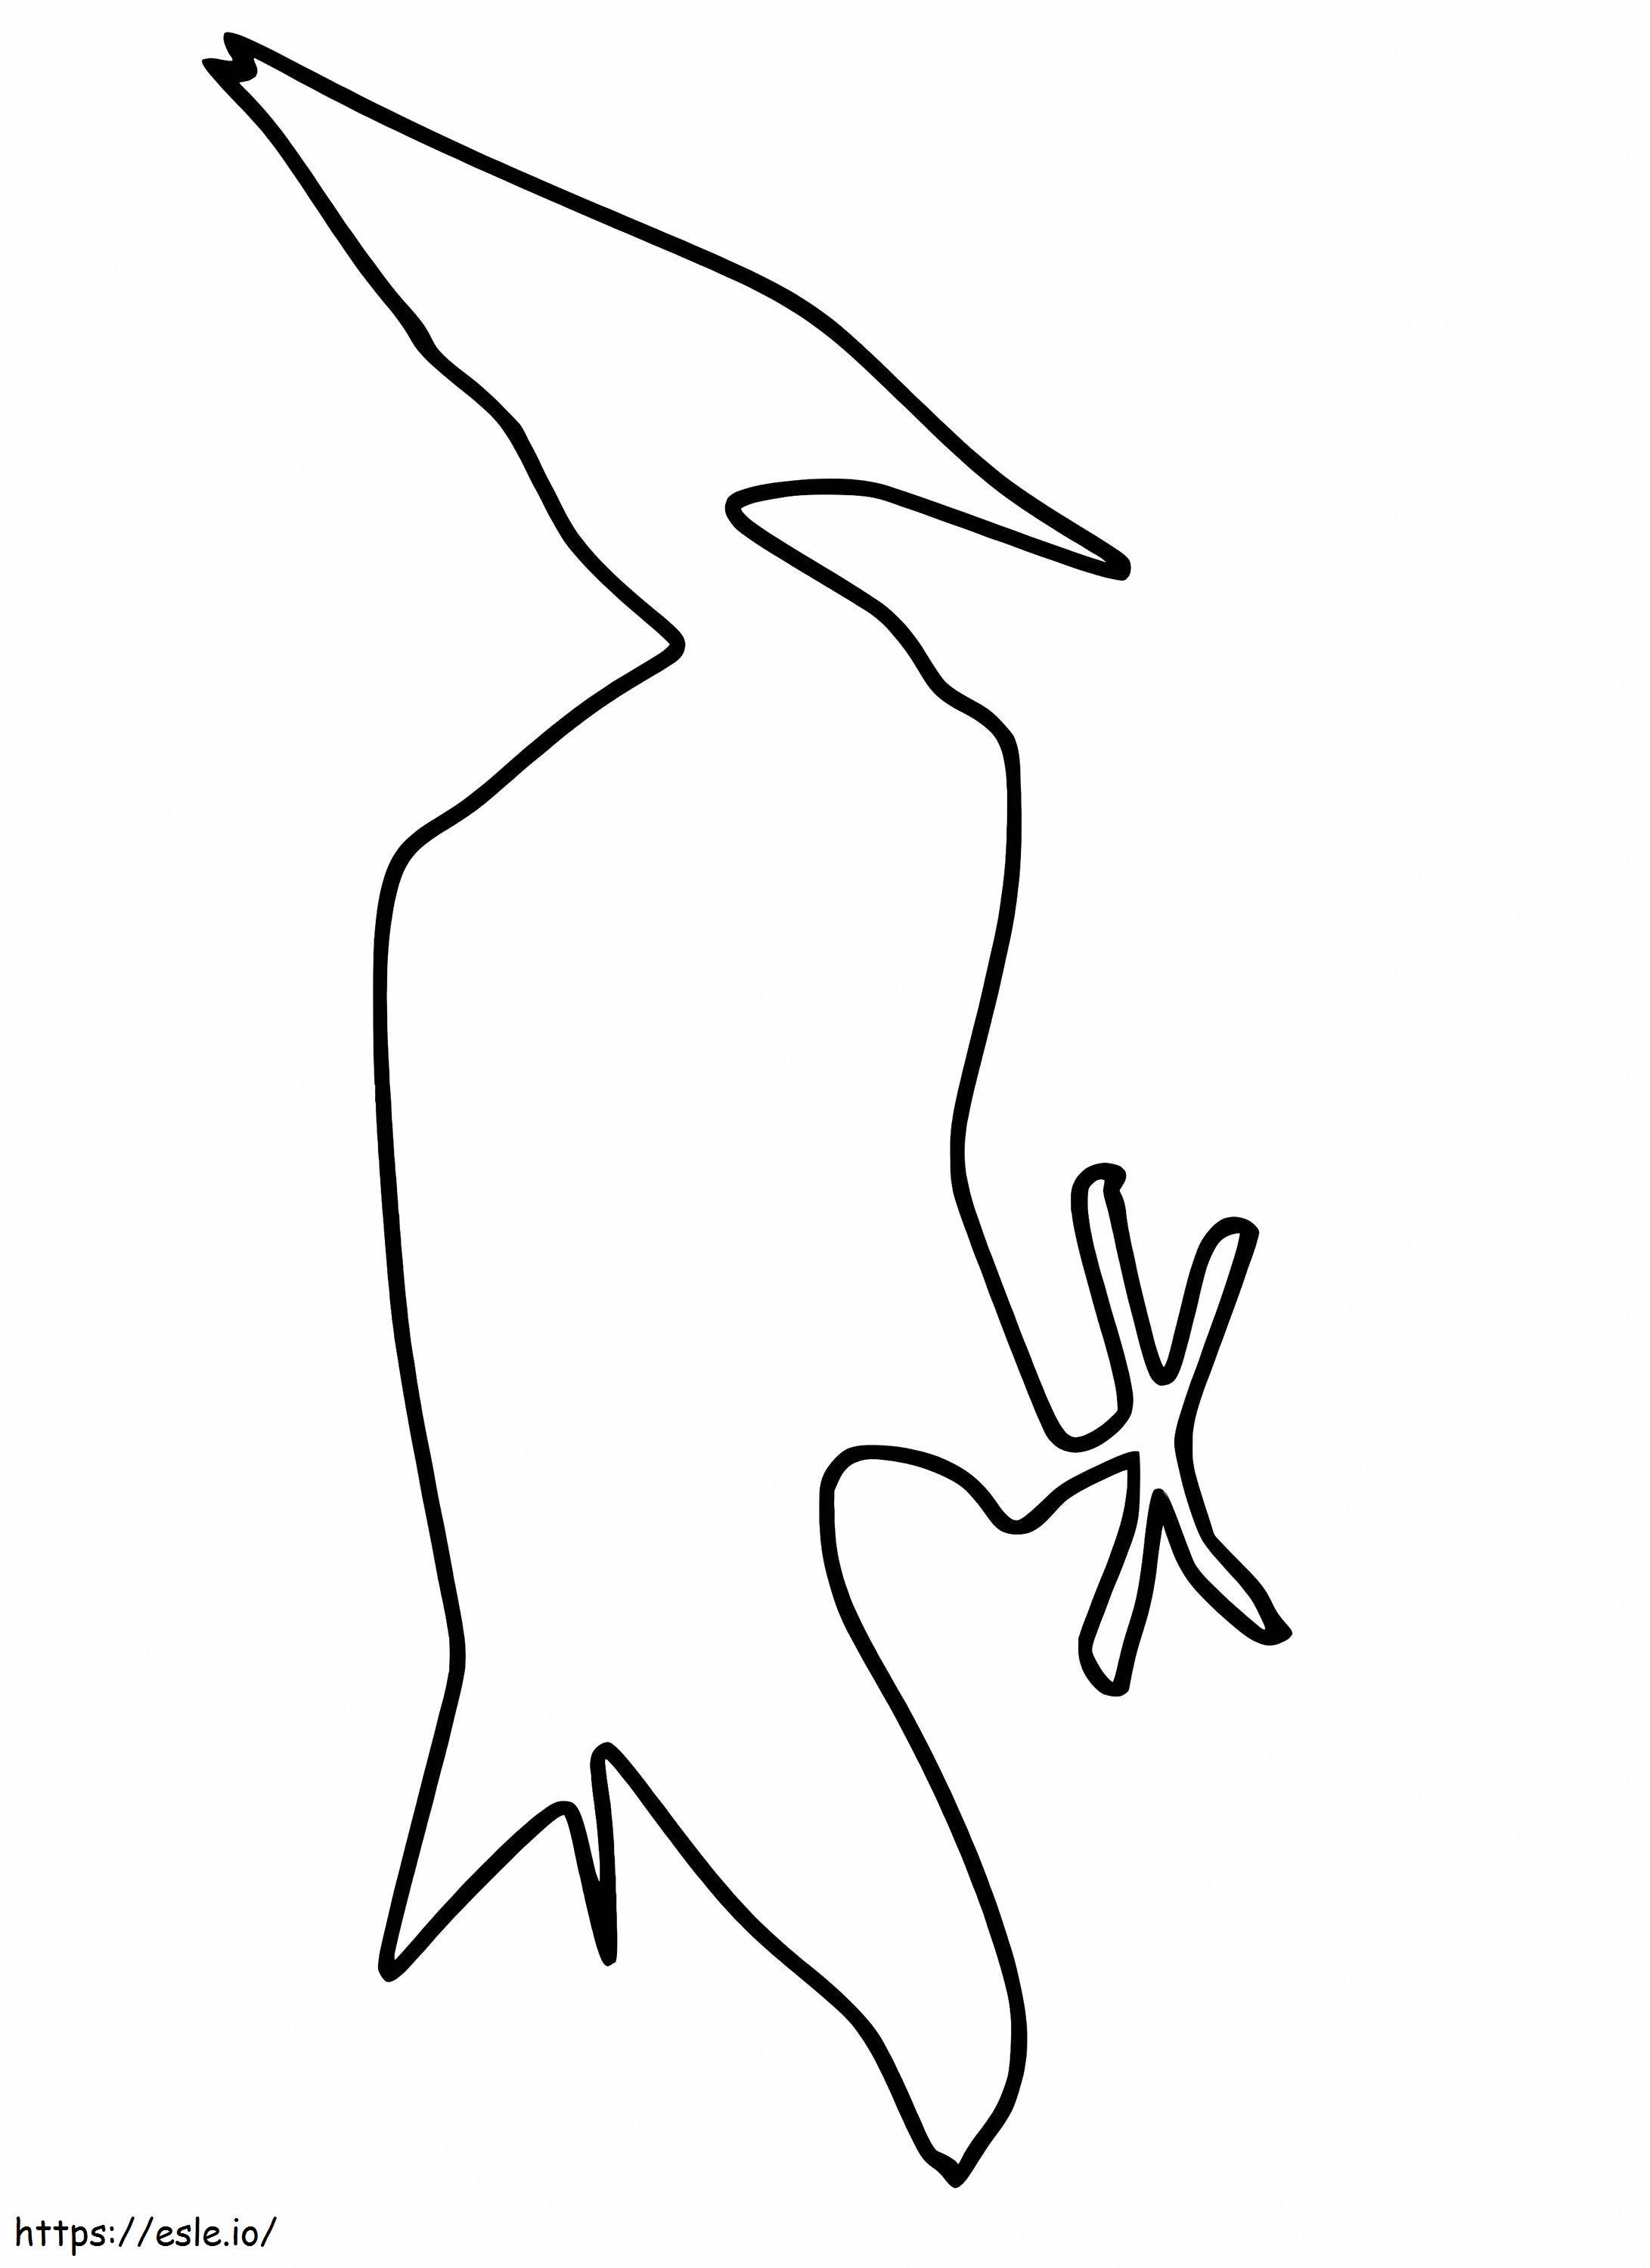 Woodpecker Outline coloring page